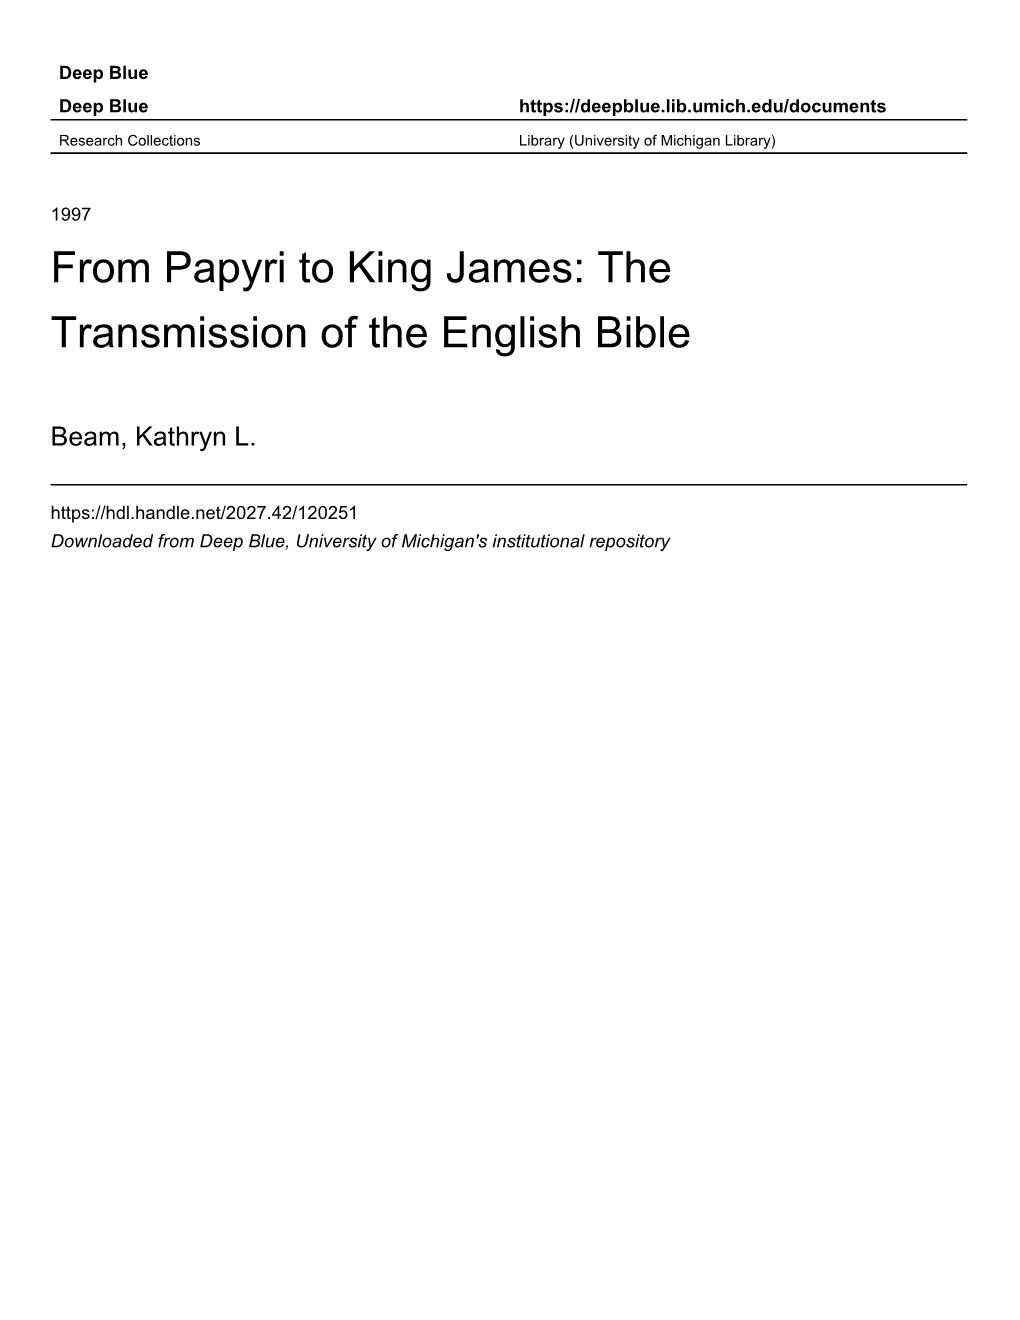 From Papyri to King James: the Transmission of the English Bible